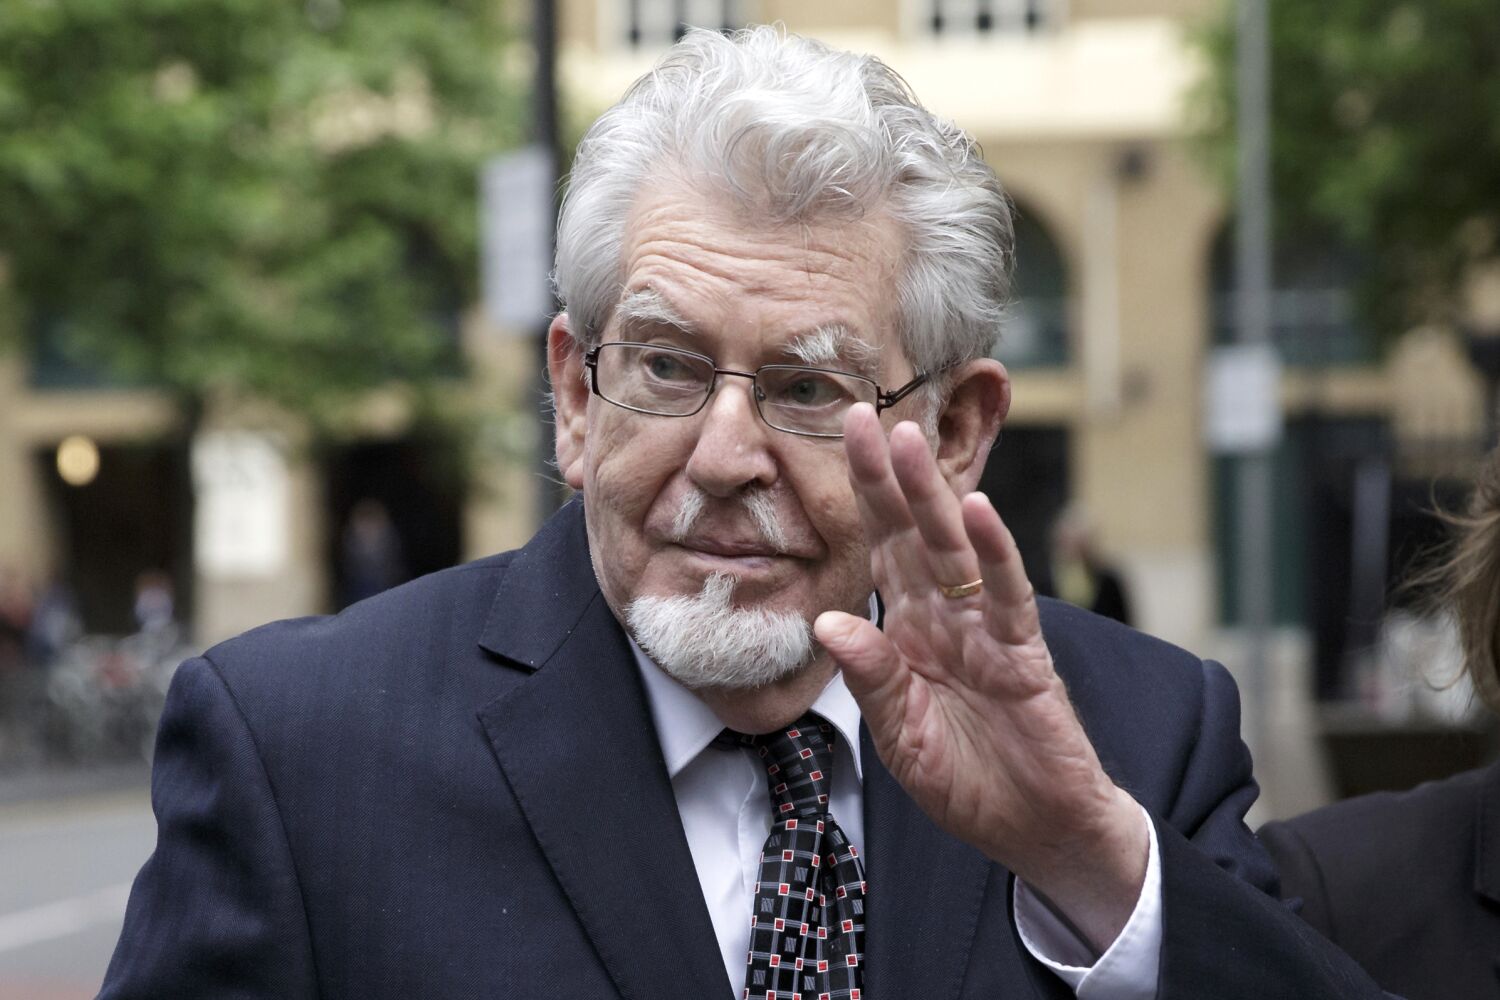 Rolf Harris, kids' TV host who was later convicted of child sexual assault, dies at 93